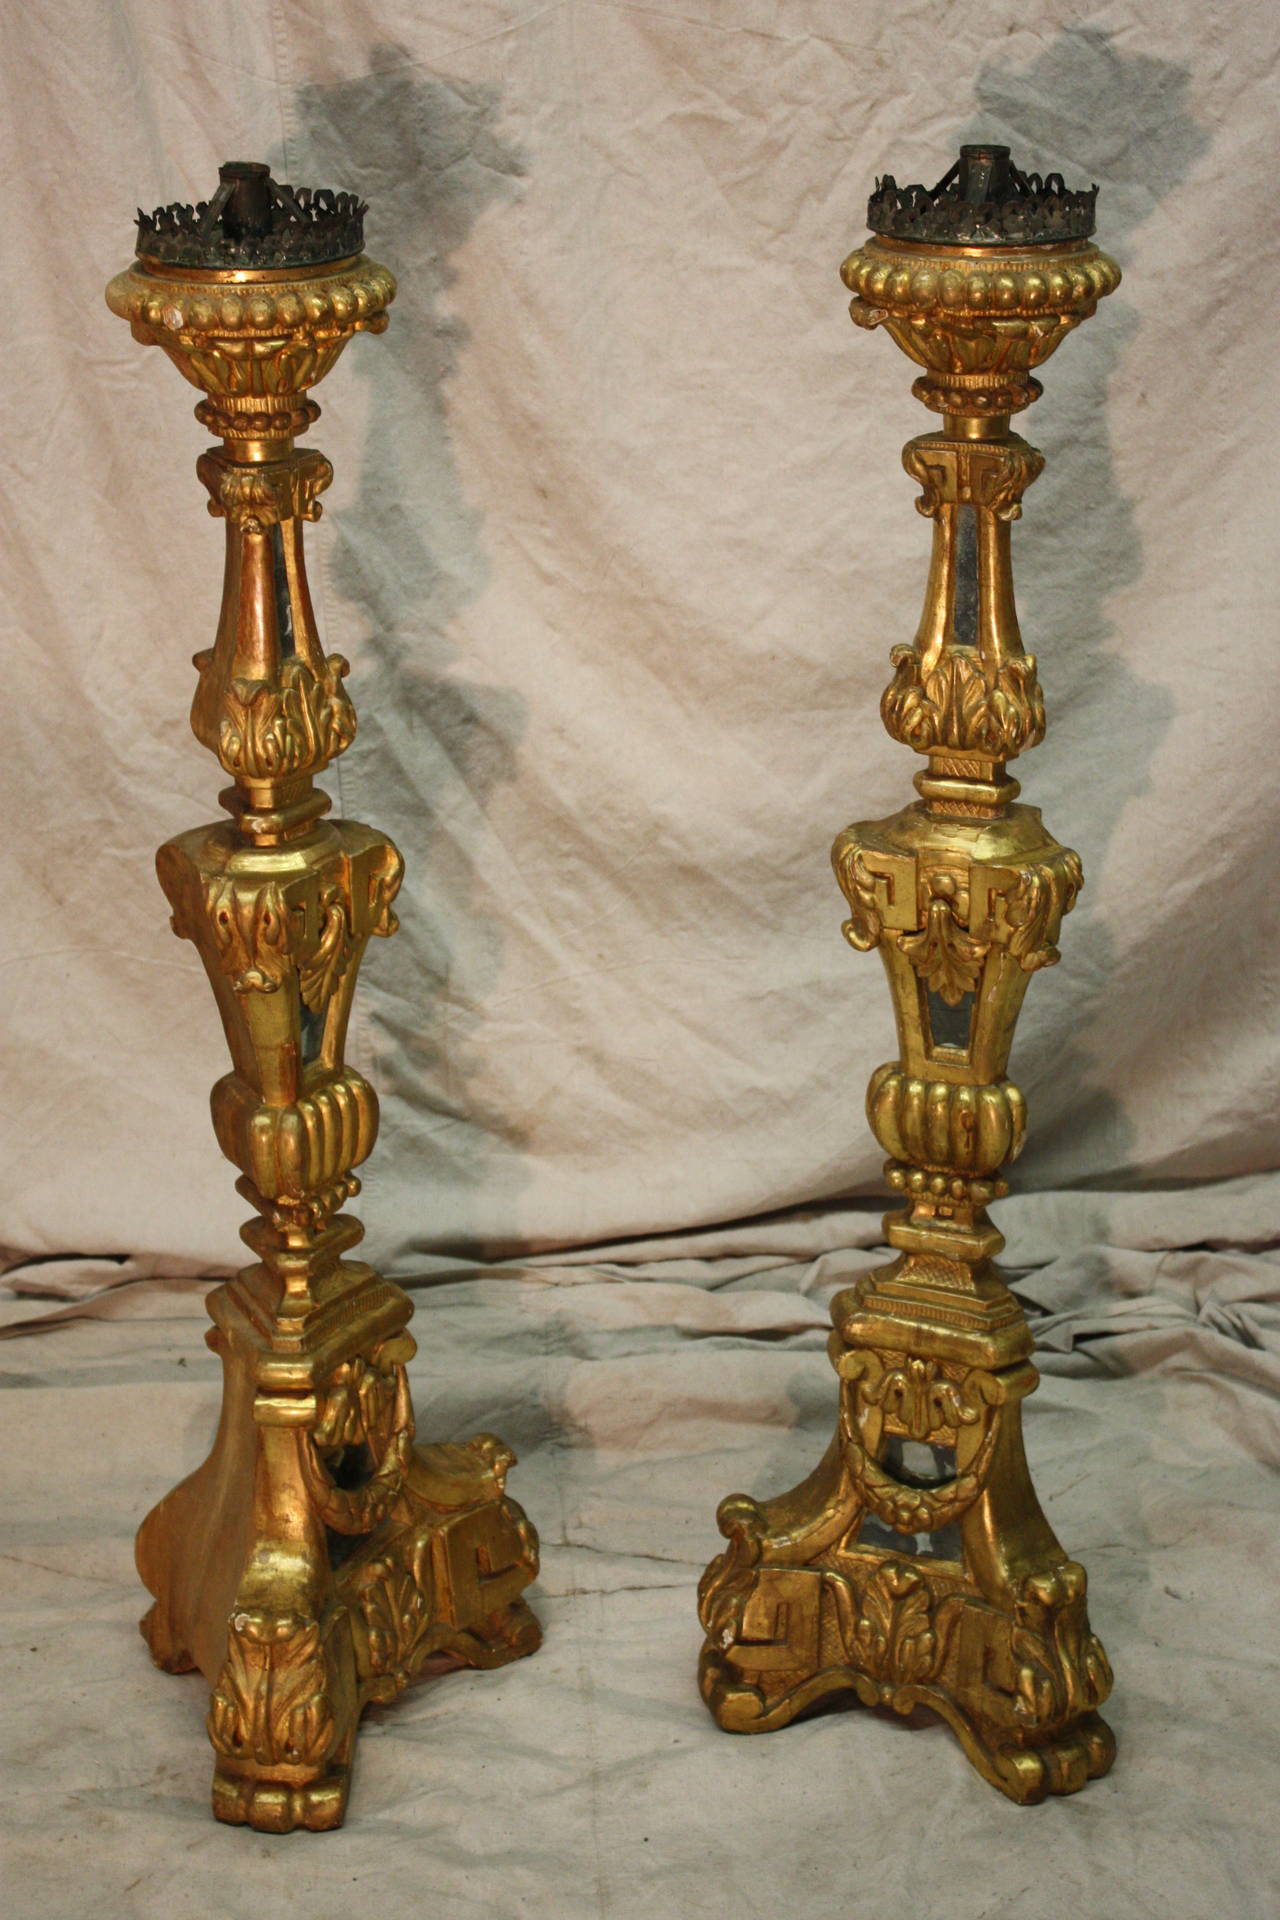 18th Century Italian Giltwood candlesticks. The candlesticks are recovered of gilt leaves and old mirrors.